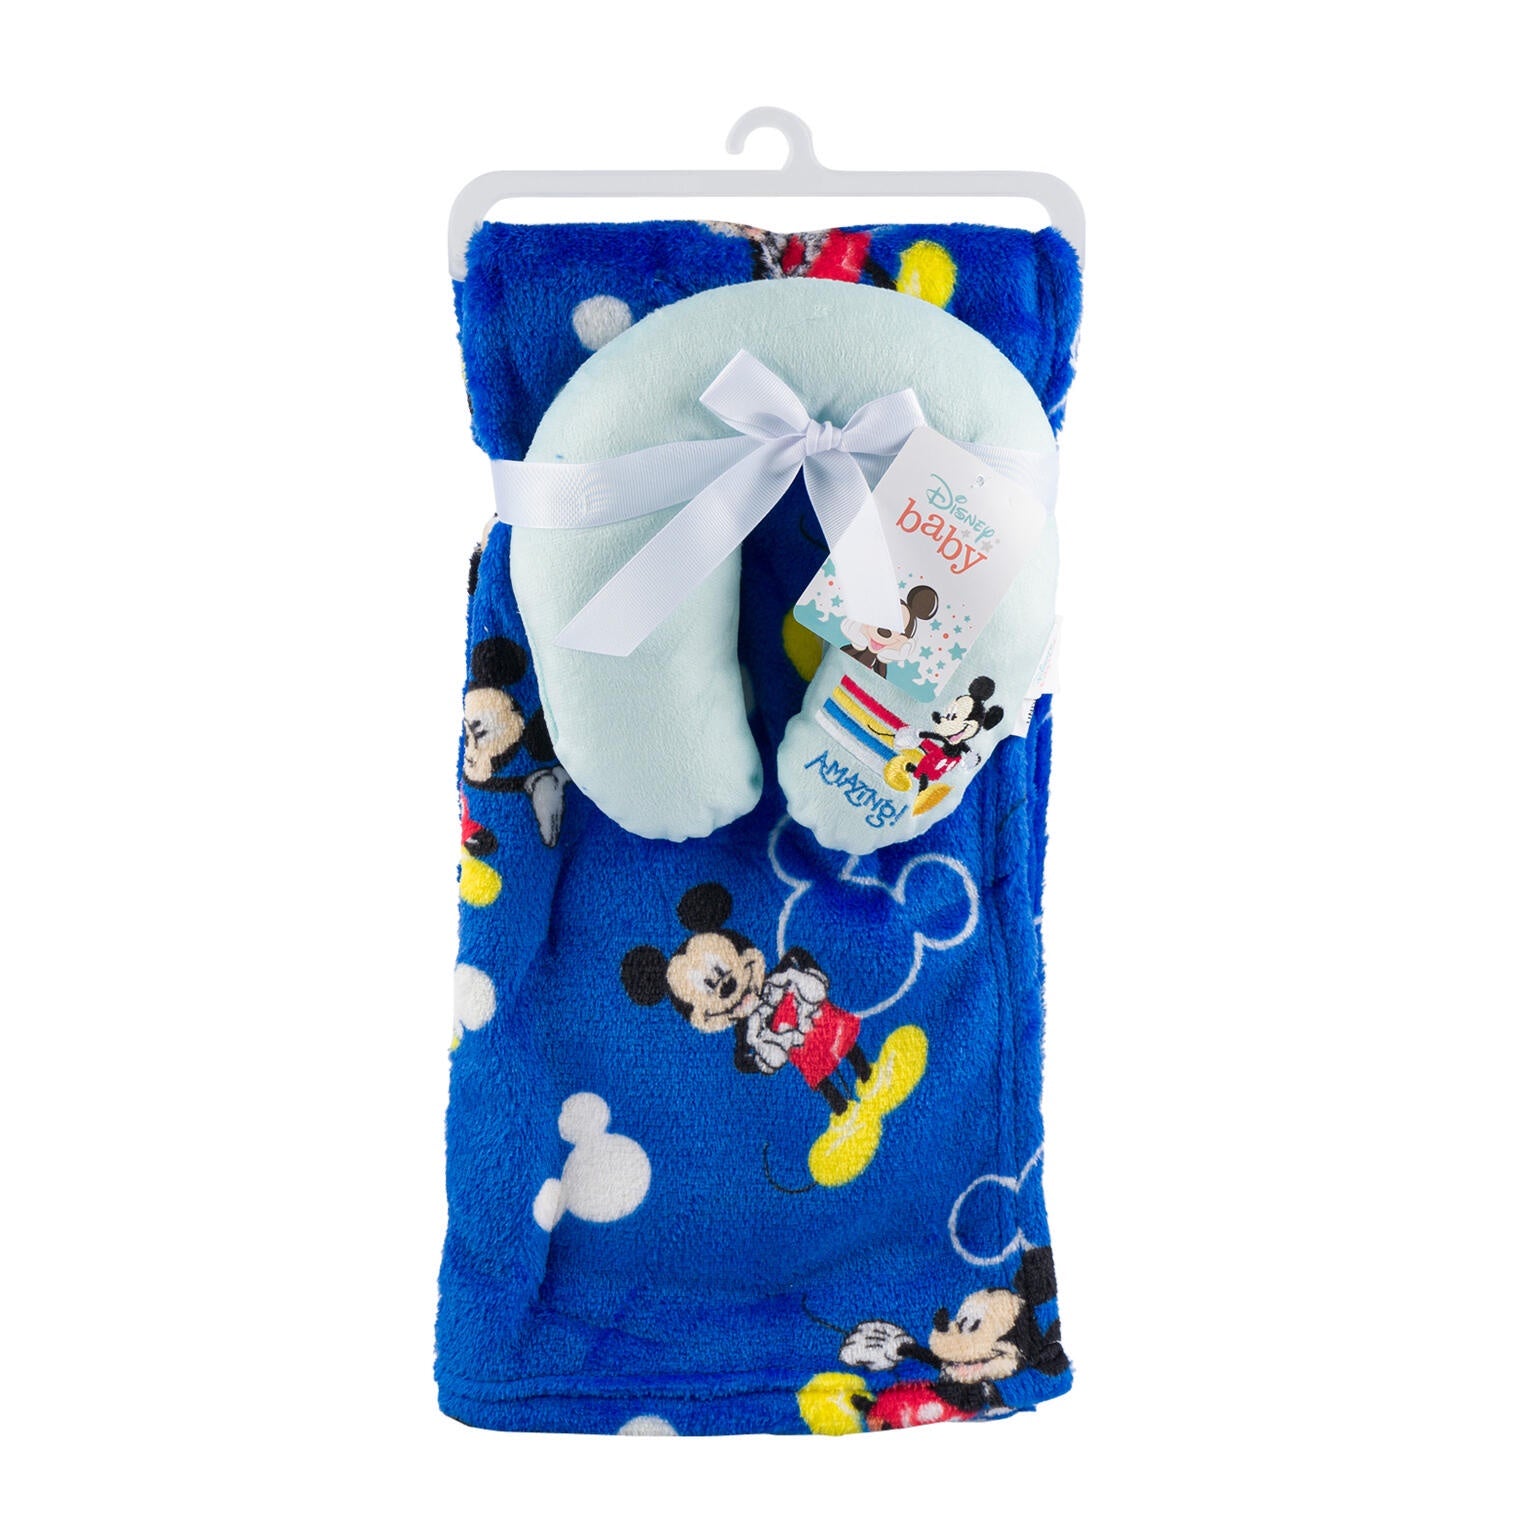 Mickey Mouse Blanket W/ Neck Pillow- 30x36"